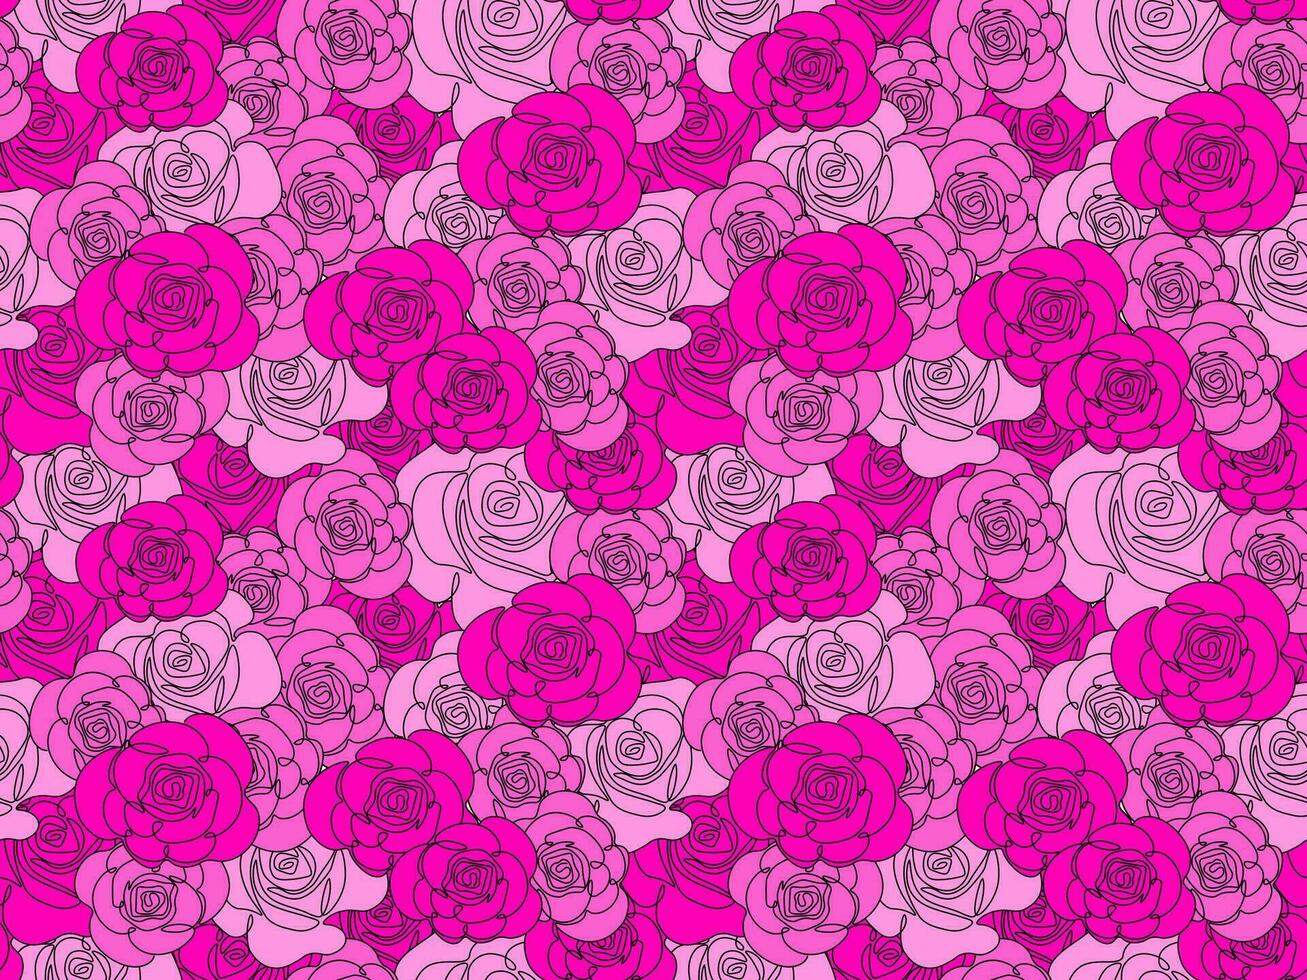 Seamless pattern of pink roses vector